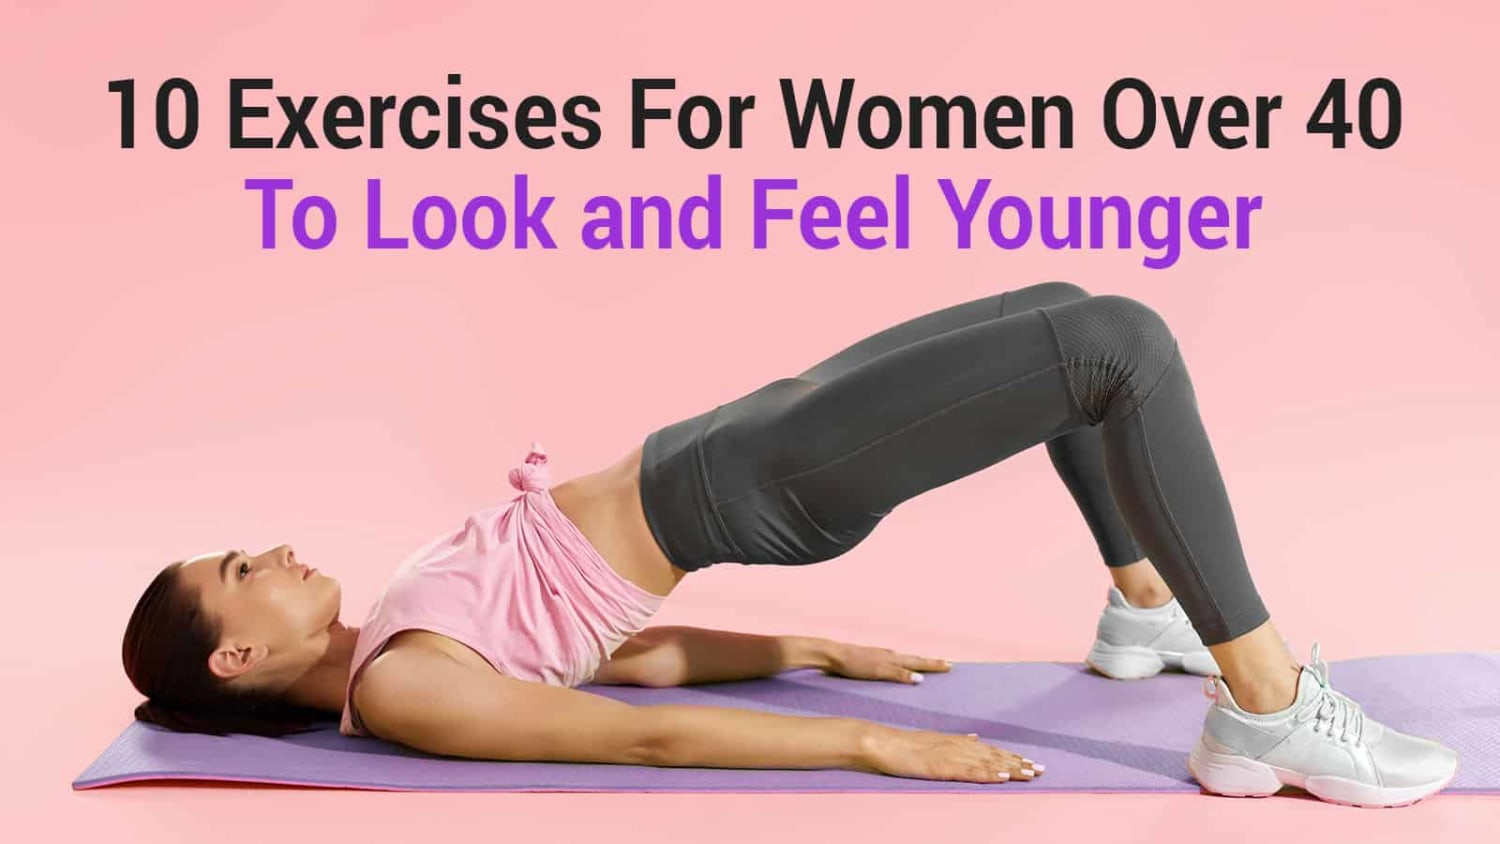 10 Exercises for Women Over 40 to Look and Feel Younger